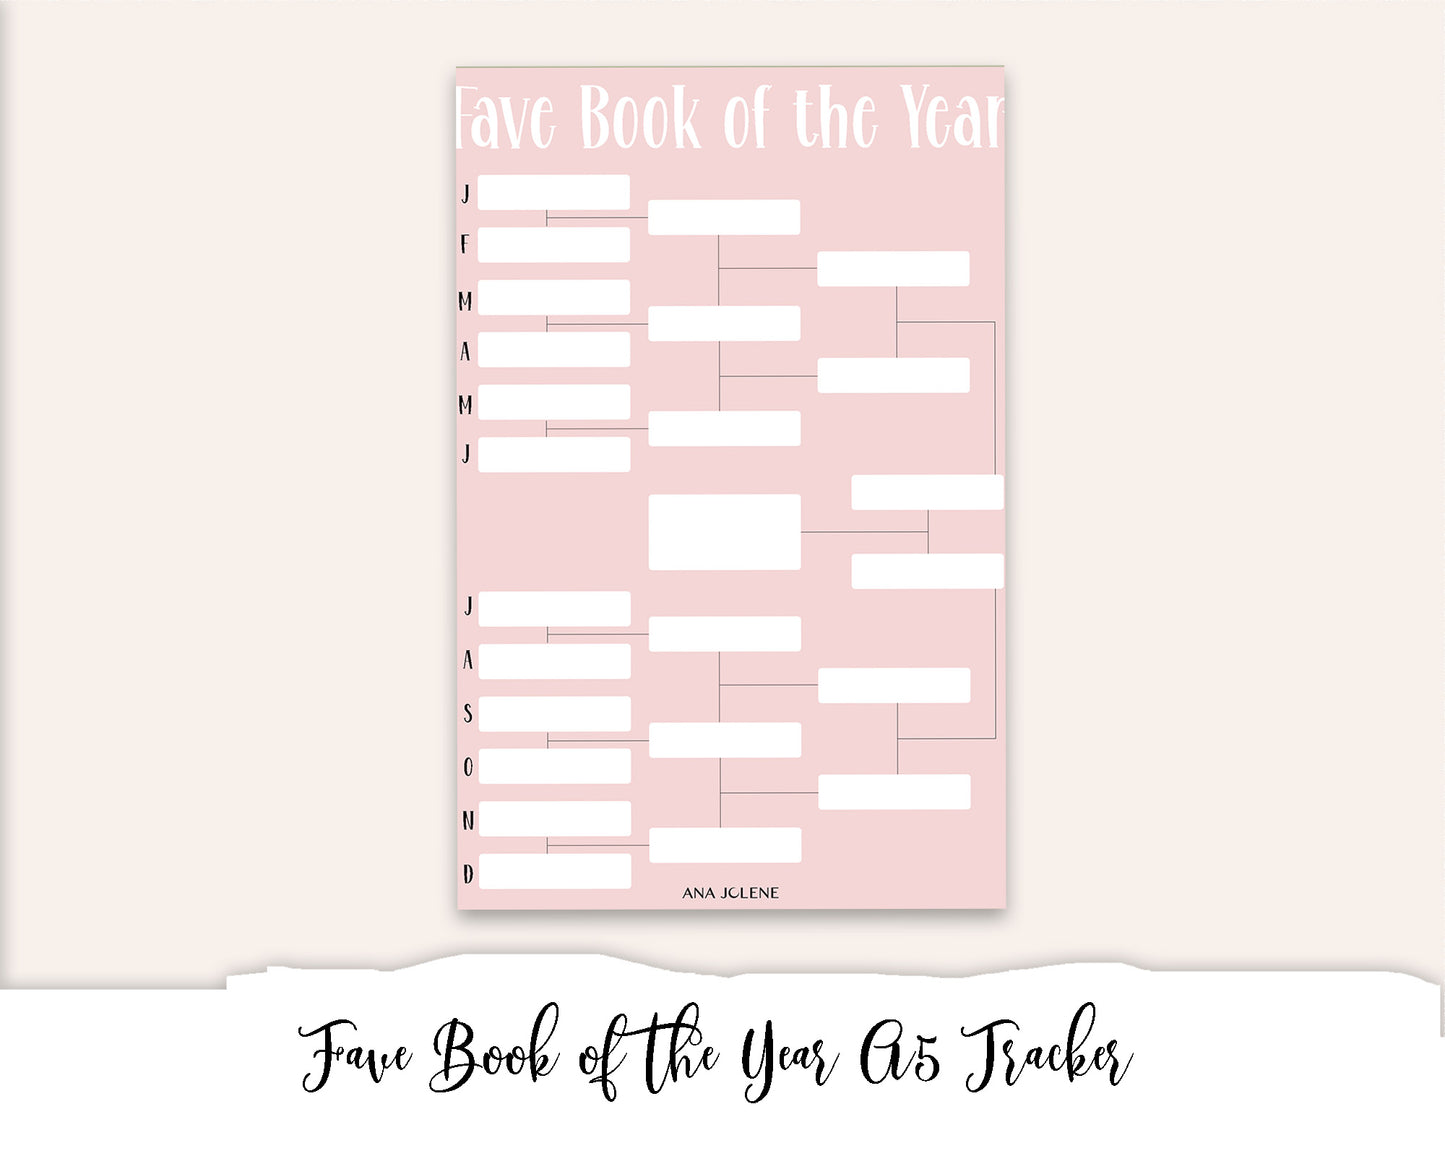 Fave Book of the Year Full Page Sticker - A5 Reading Journal